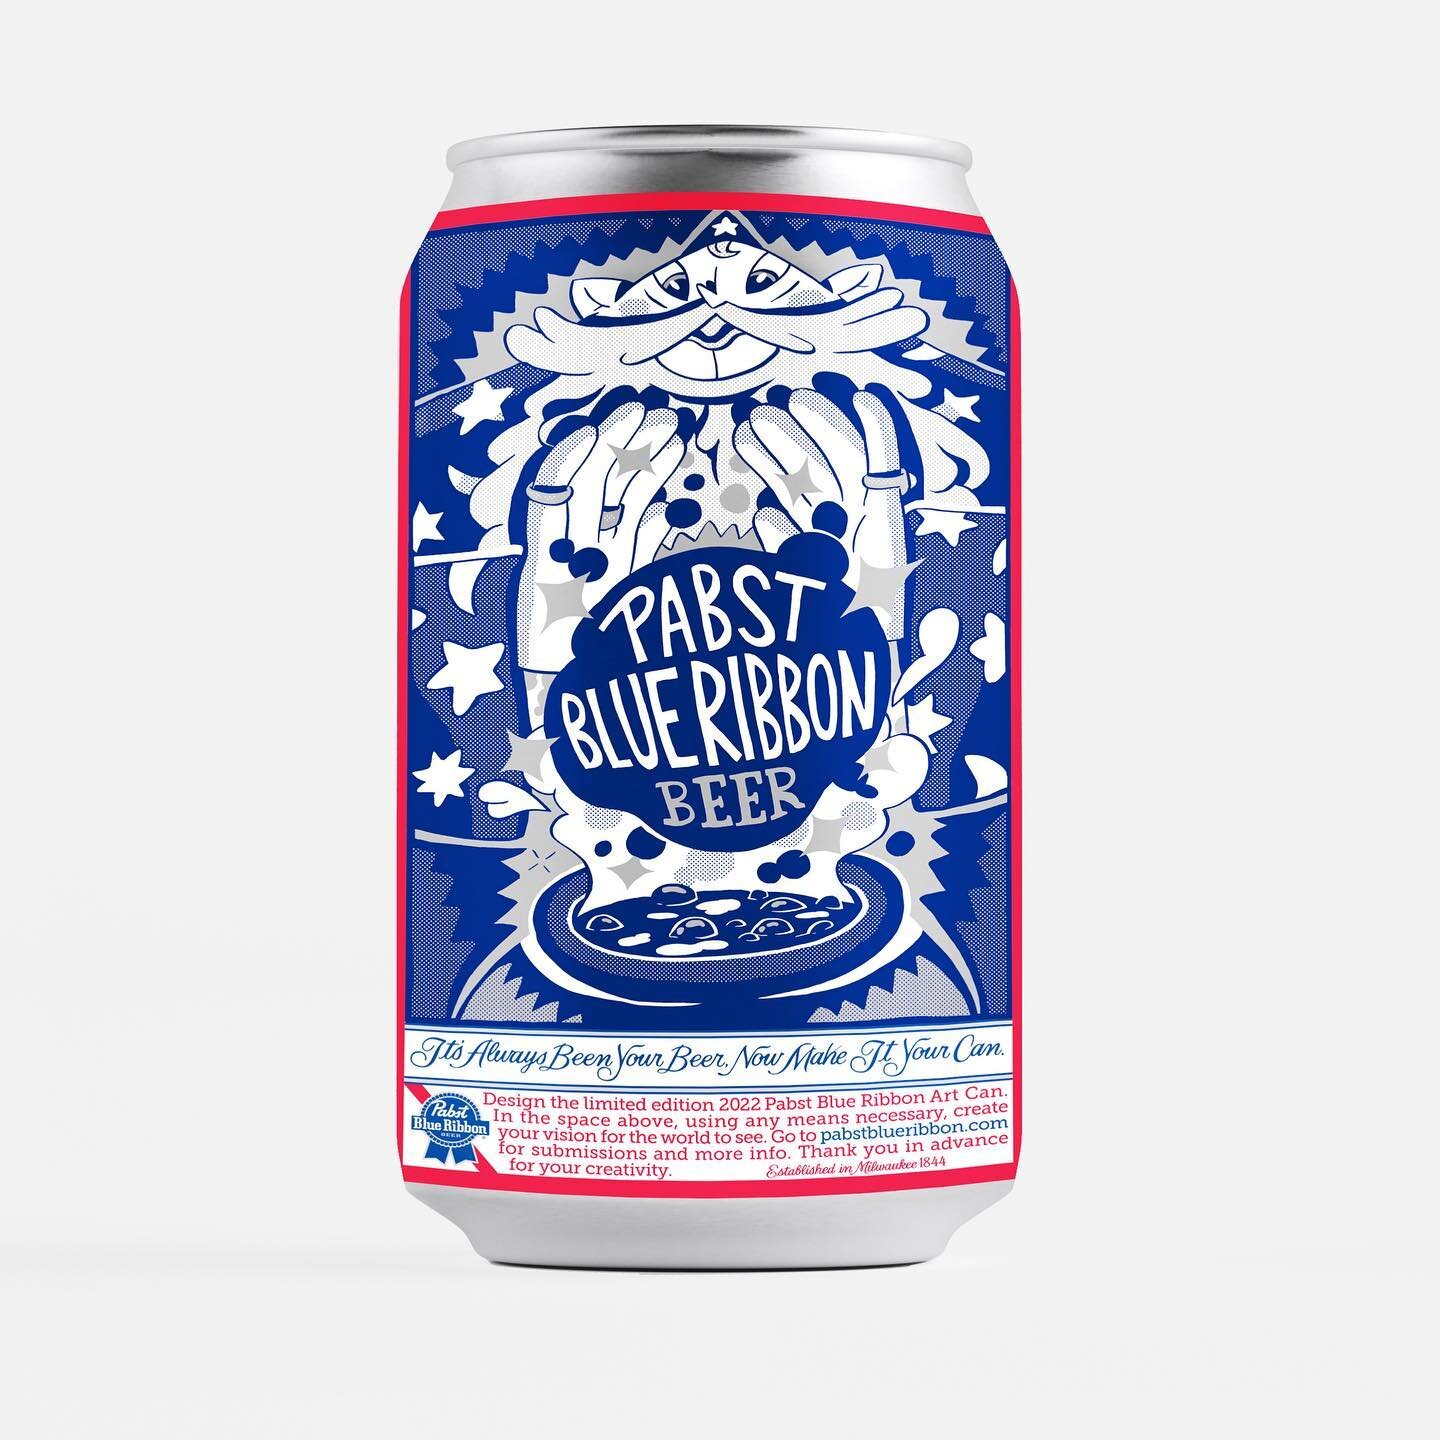 Whuddup warlocks, wizards, and witches. It&rsquo;s time to ponder the PBR!!!! Here&rsquo;s my submission to the @pabstblueribbon can art contest. Wish me luck!
.
.
.
.
.
.
.
.
.
#pbr #pabst #pabstblueribbon #beercan #beer #beercanart #brewart #wizard